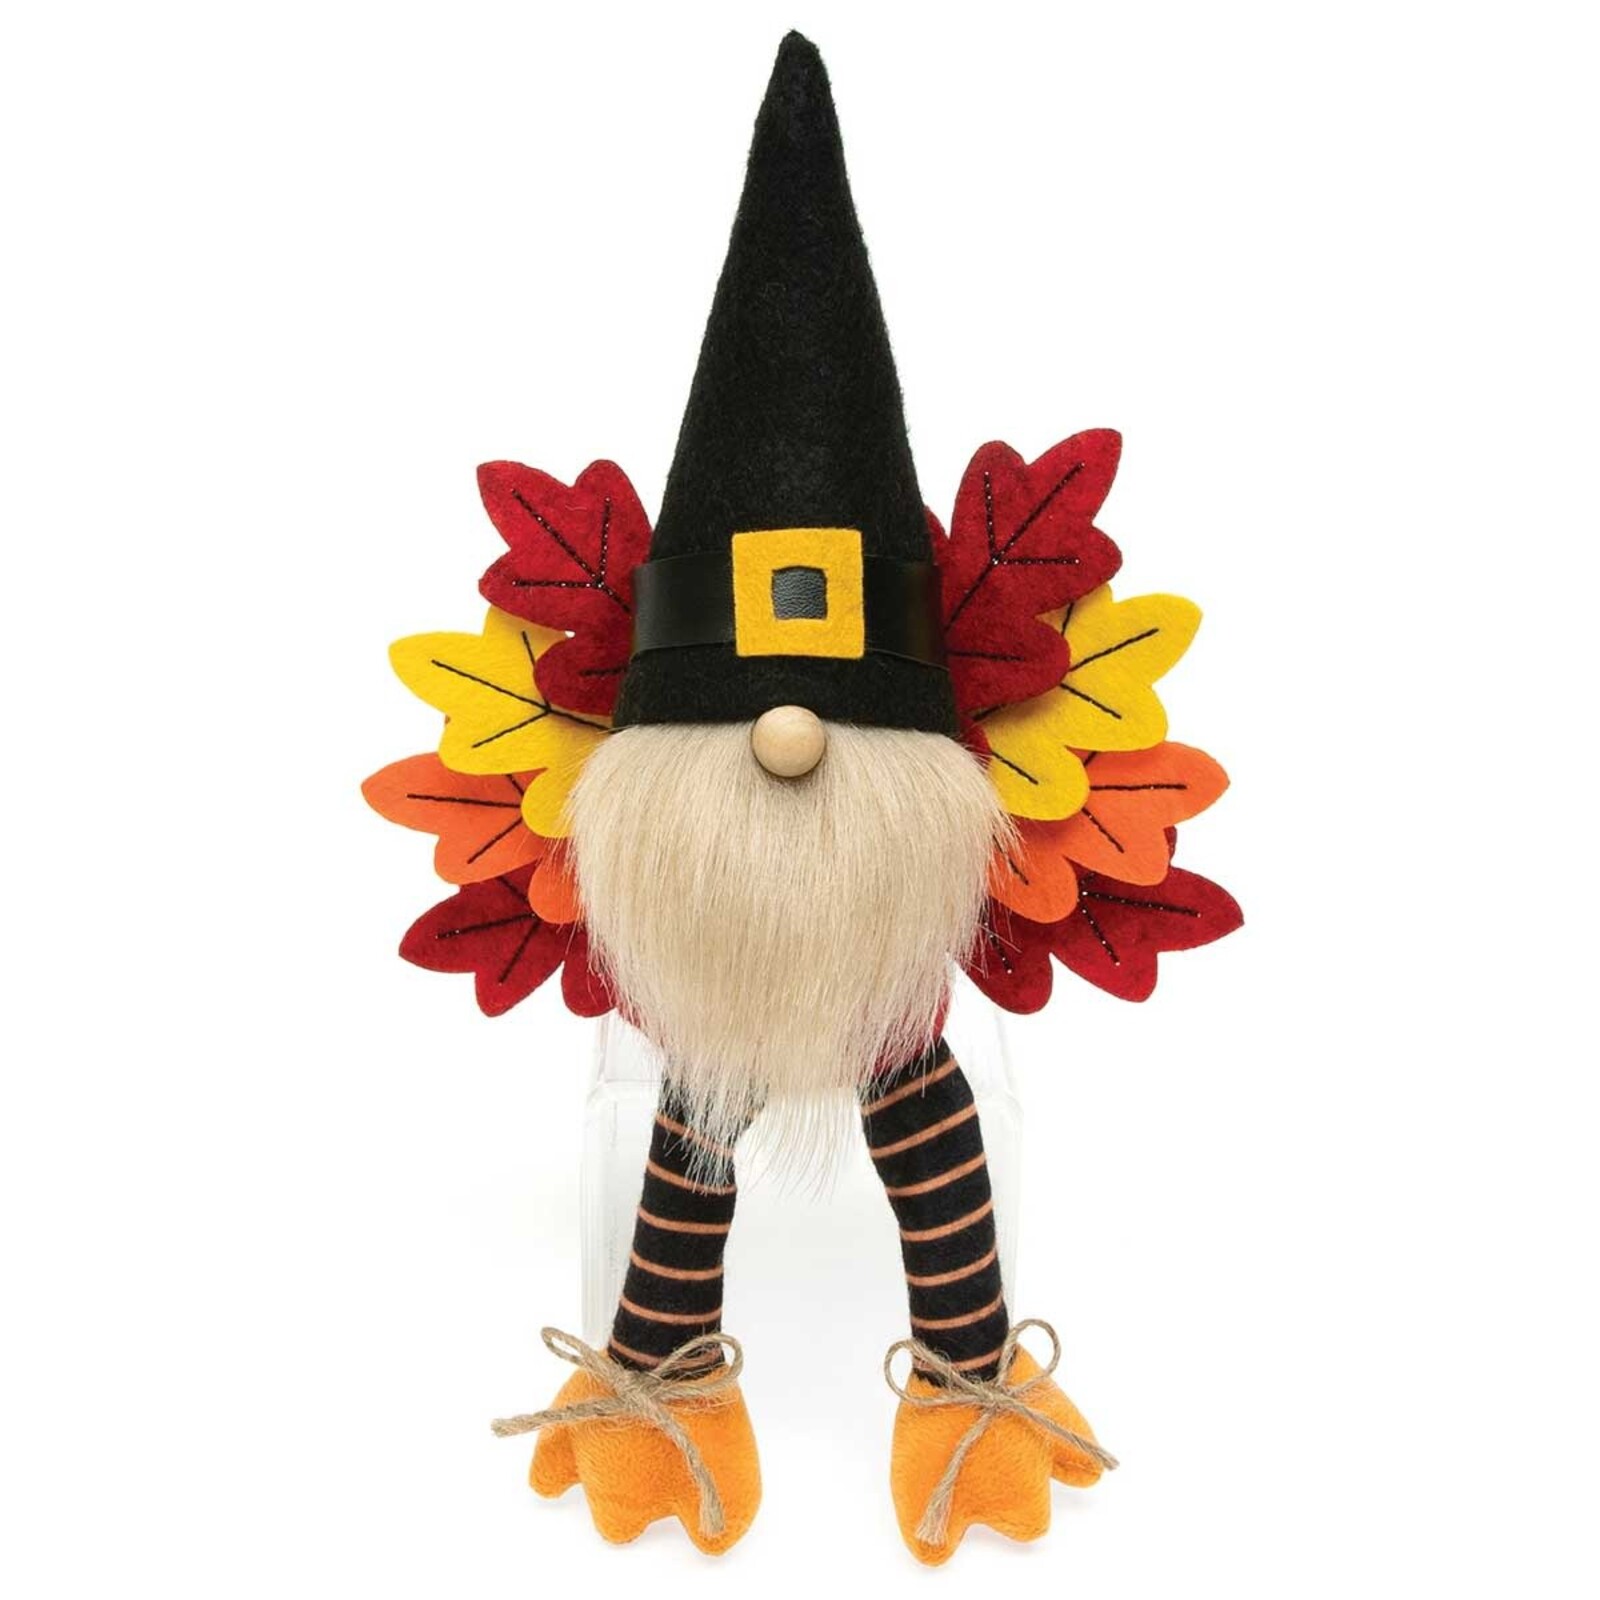 Meravic TOM TURKEY GNOME WITH FLOPPY LEGS SMALL   F2681 loading=